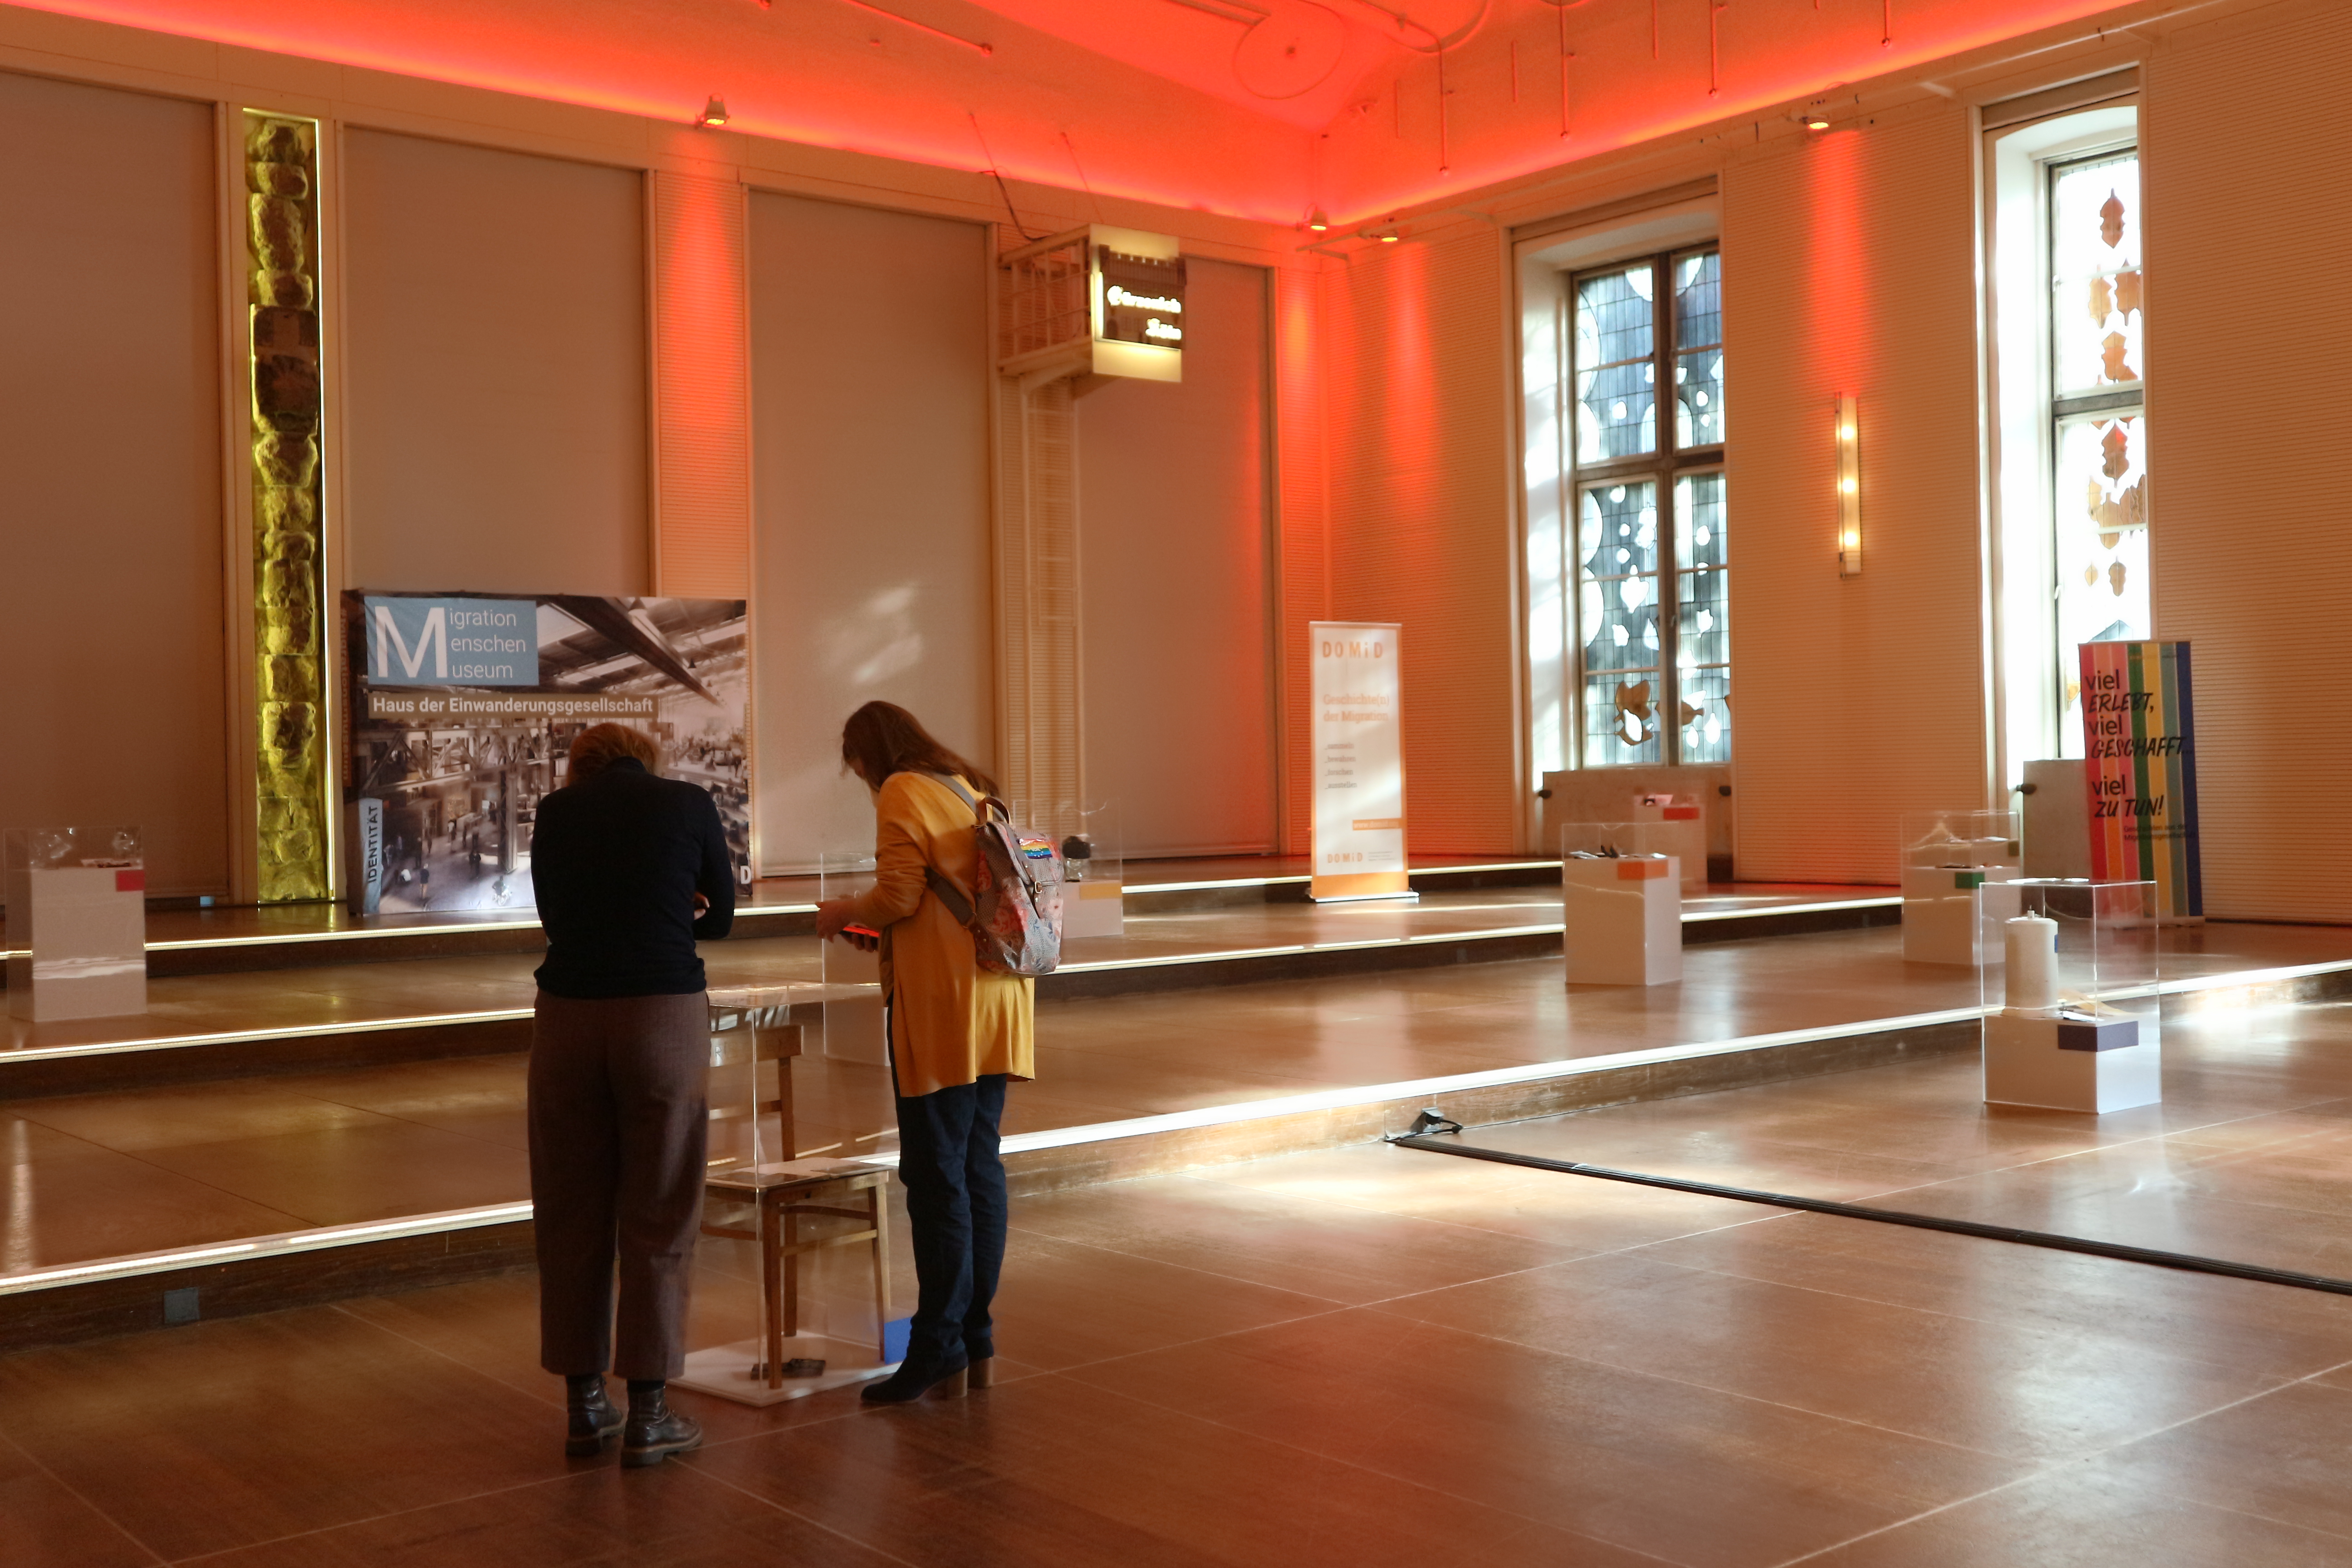 The visitors had the opportunity to see our exhibition at the ceremony of the city of Cologne. Photo: DOMiD Archive, Cologne